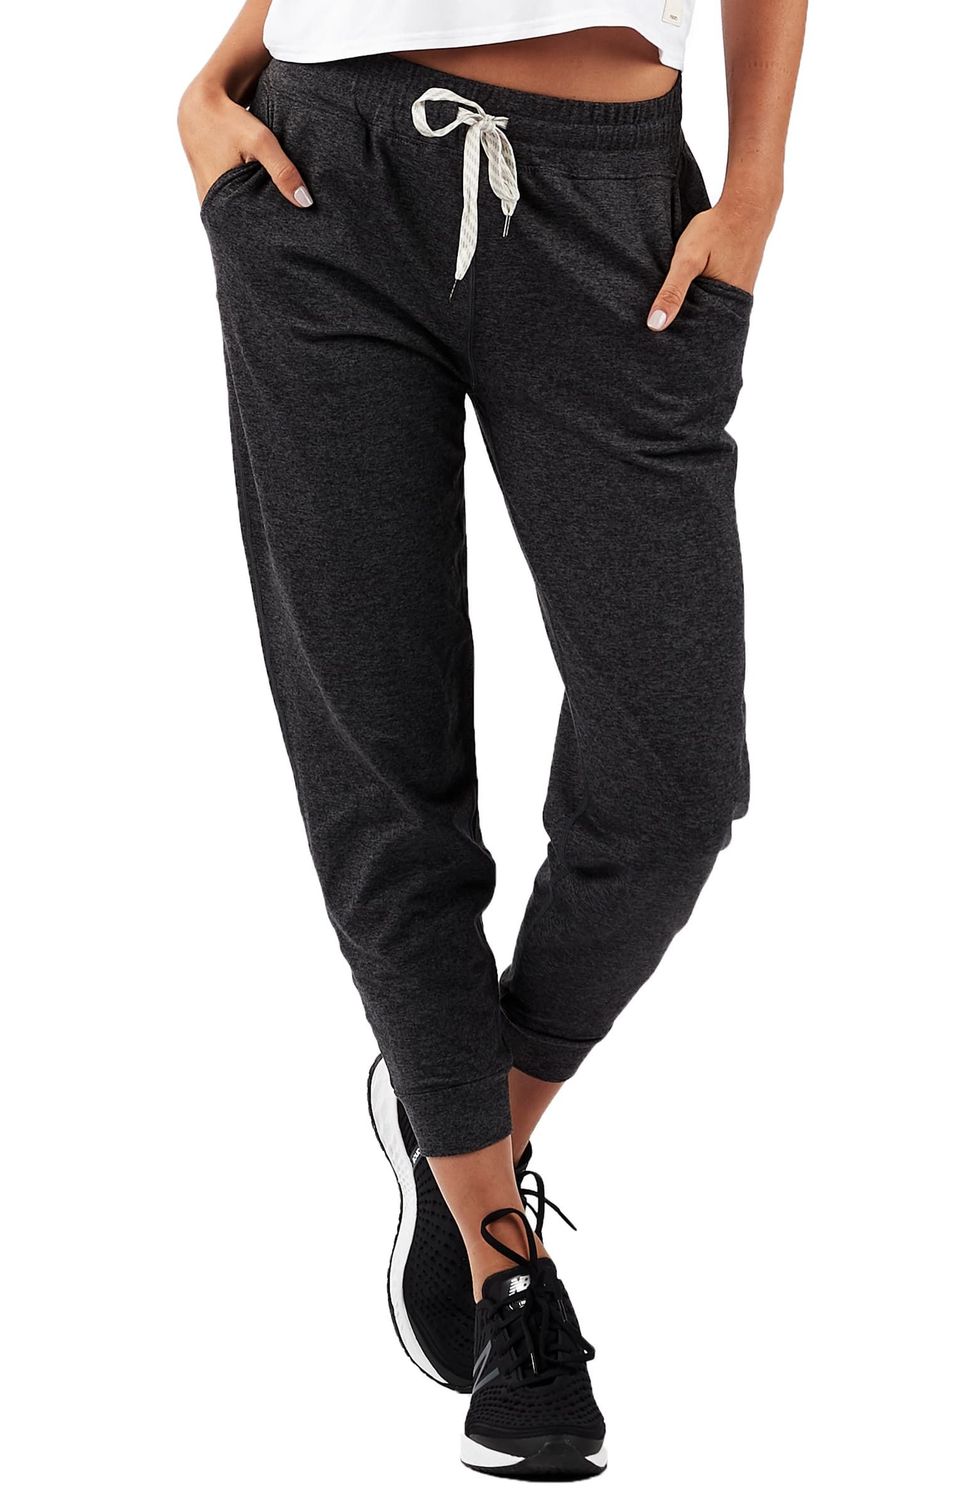 Stay Active in Style with SweatyRocks Women's Athletic Pants